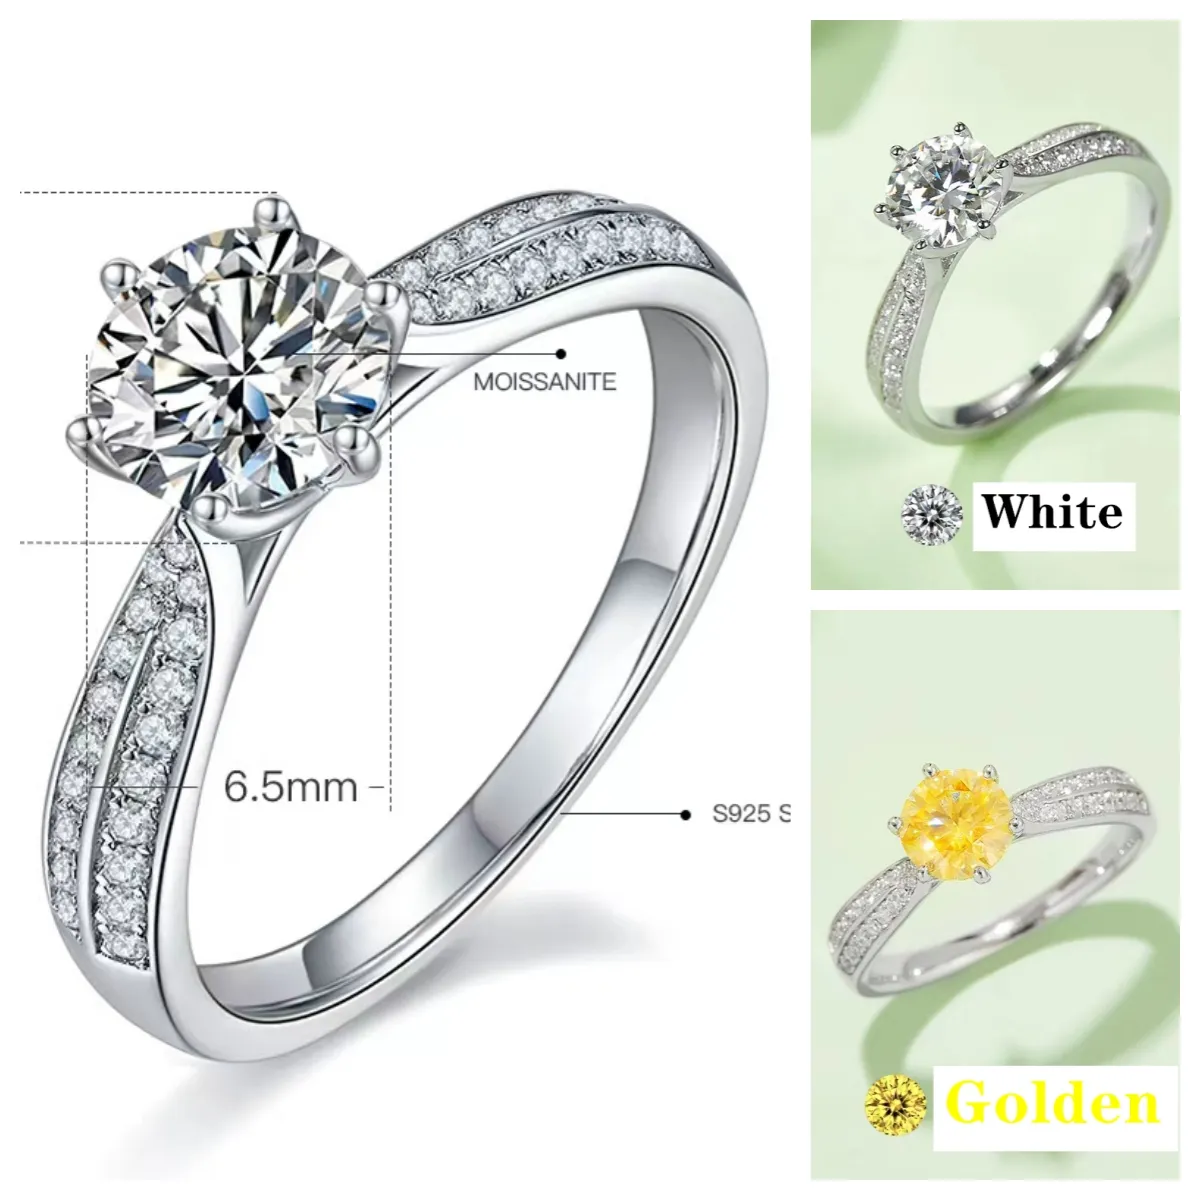 Wedding Ring Luxury Ring Love Ring Designer Ring Mother Gift Classic Series Moissanite Rings for Women Diamond Engagement Ring Solitaire Platinum Plating M06a